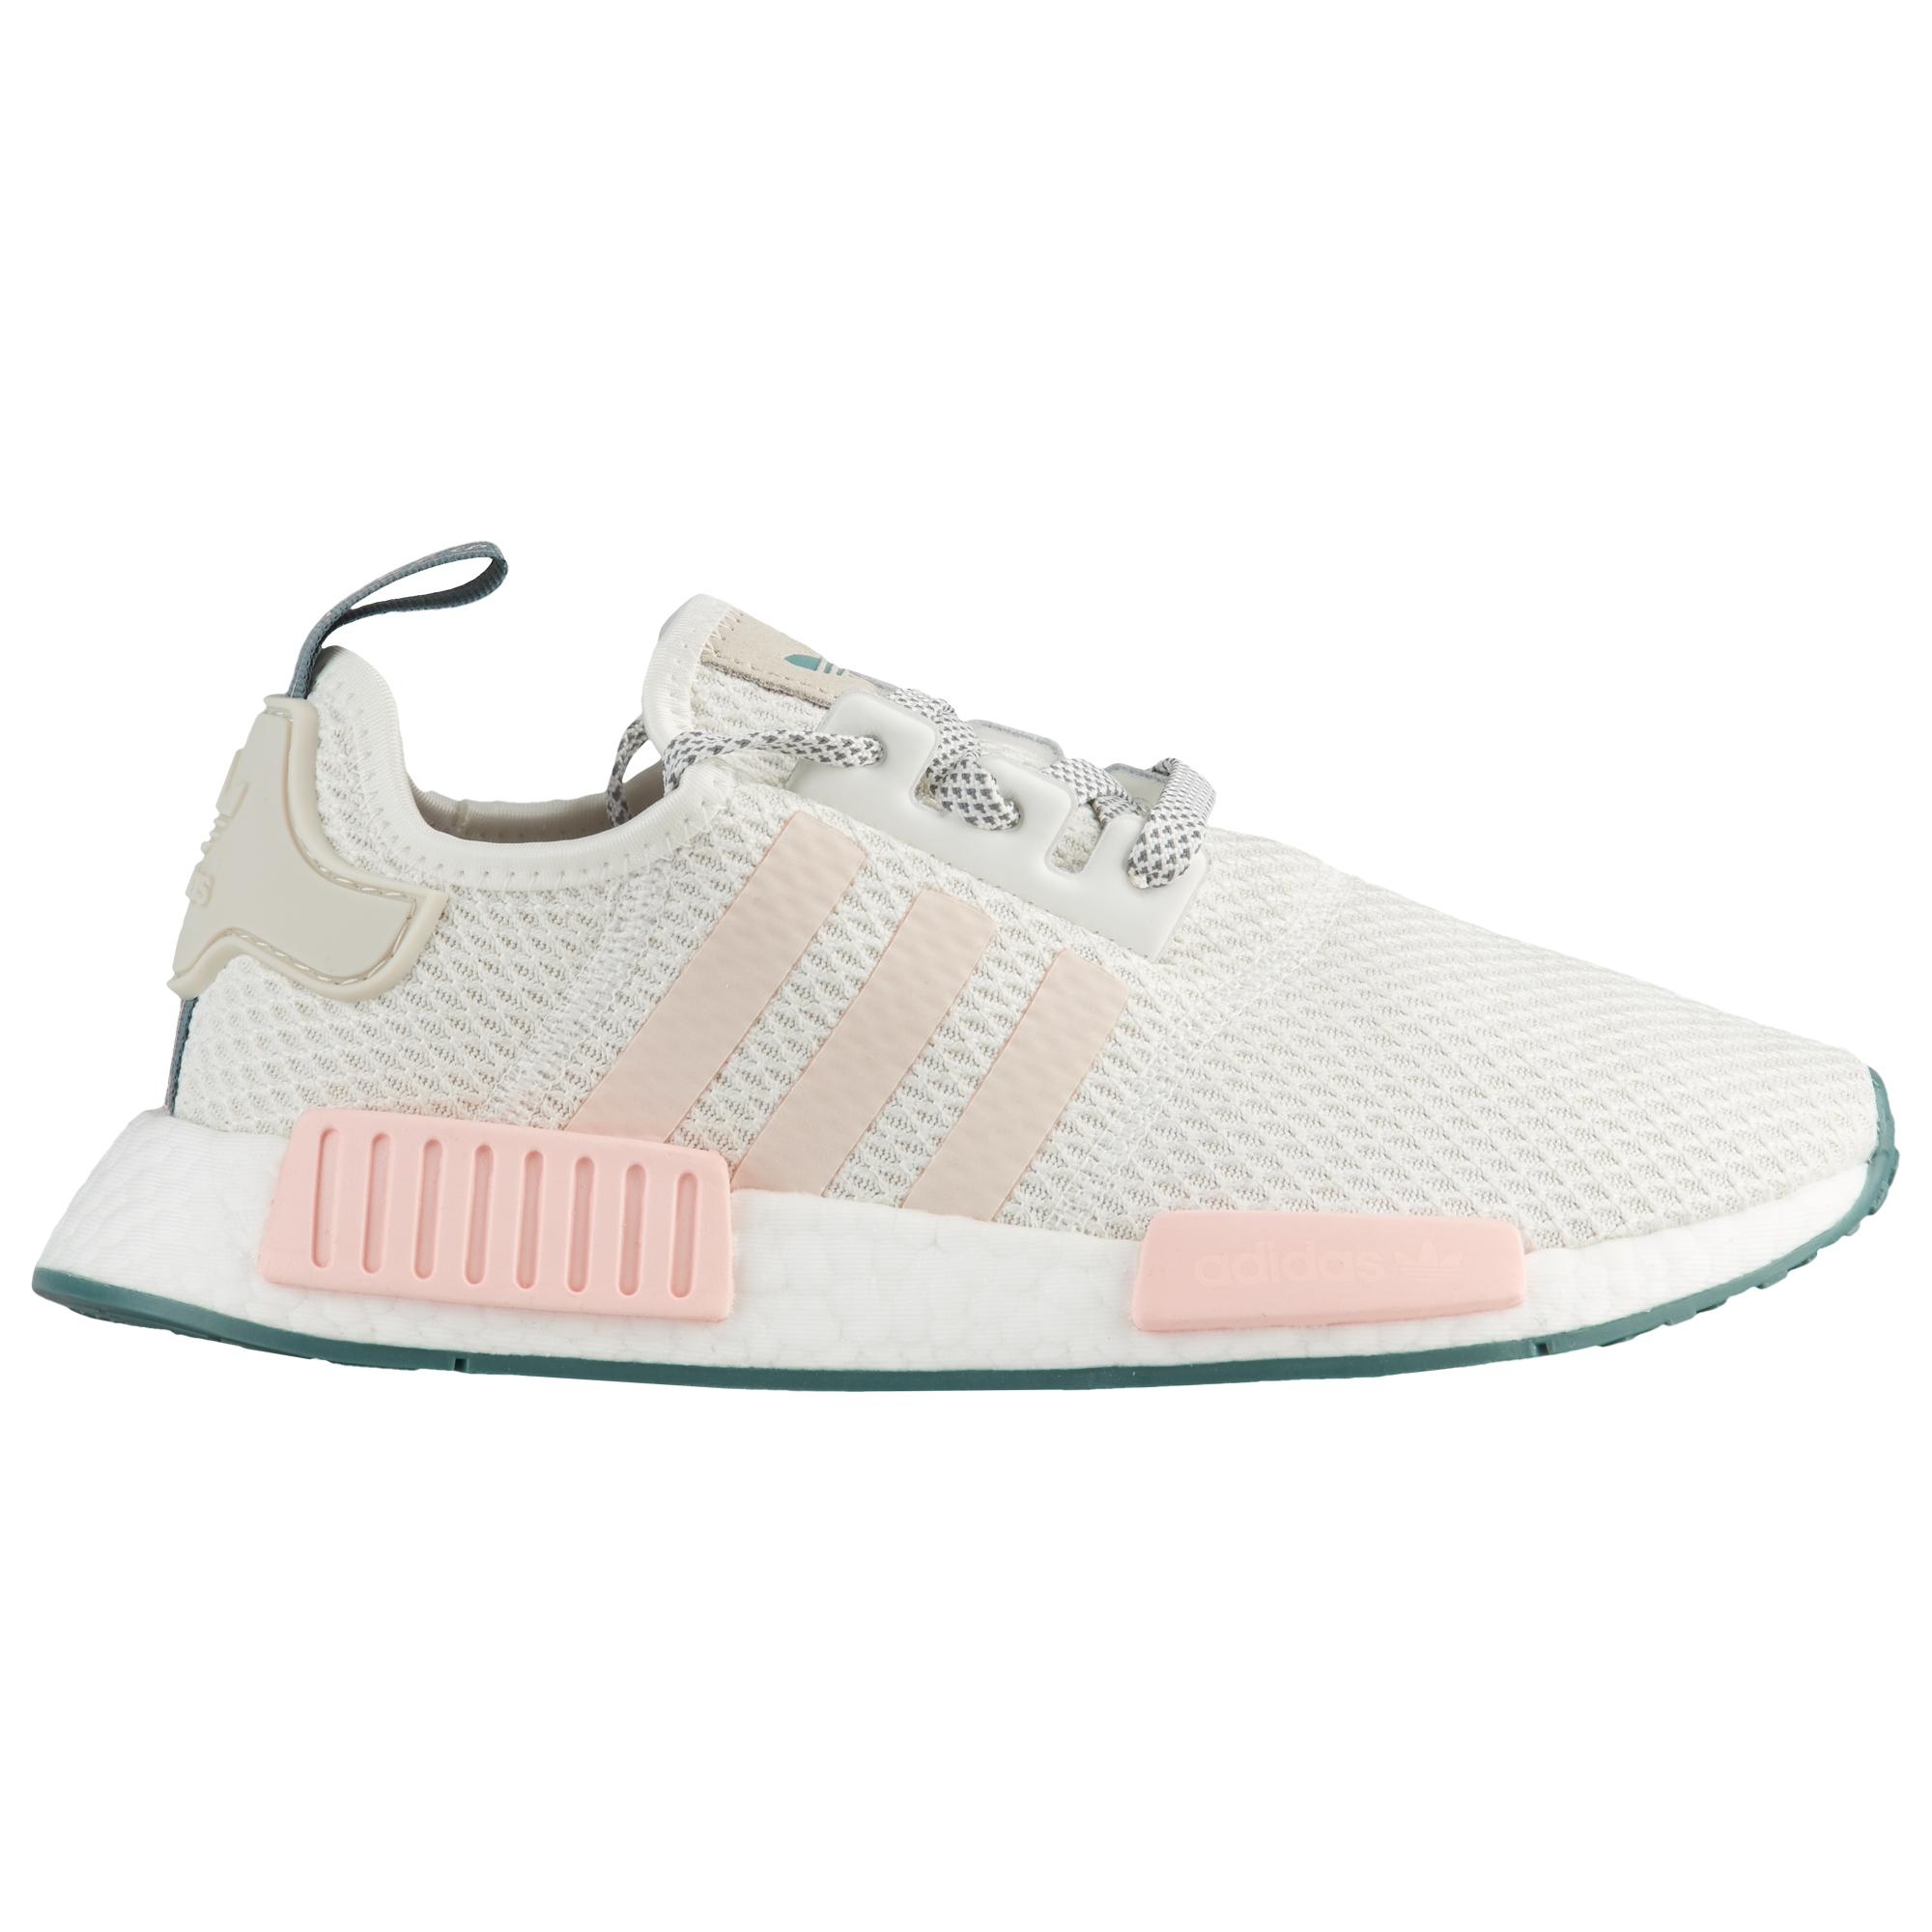 adidas nmd raw pink champs,Quality assurance,protein-burger.com